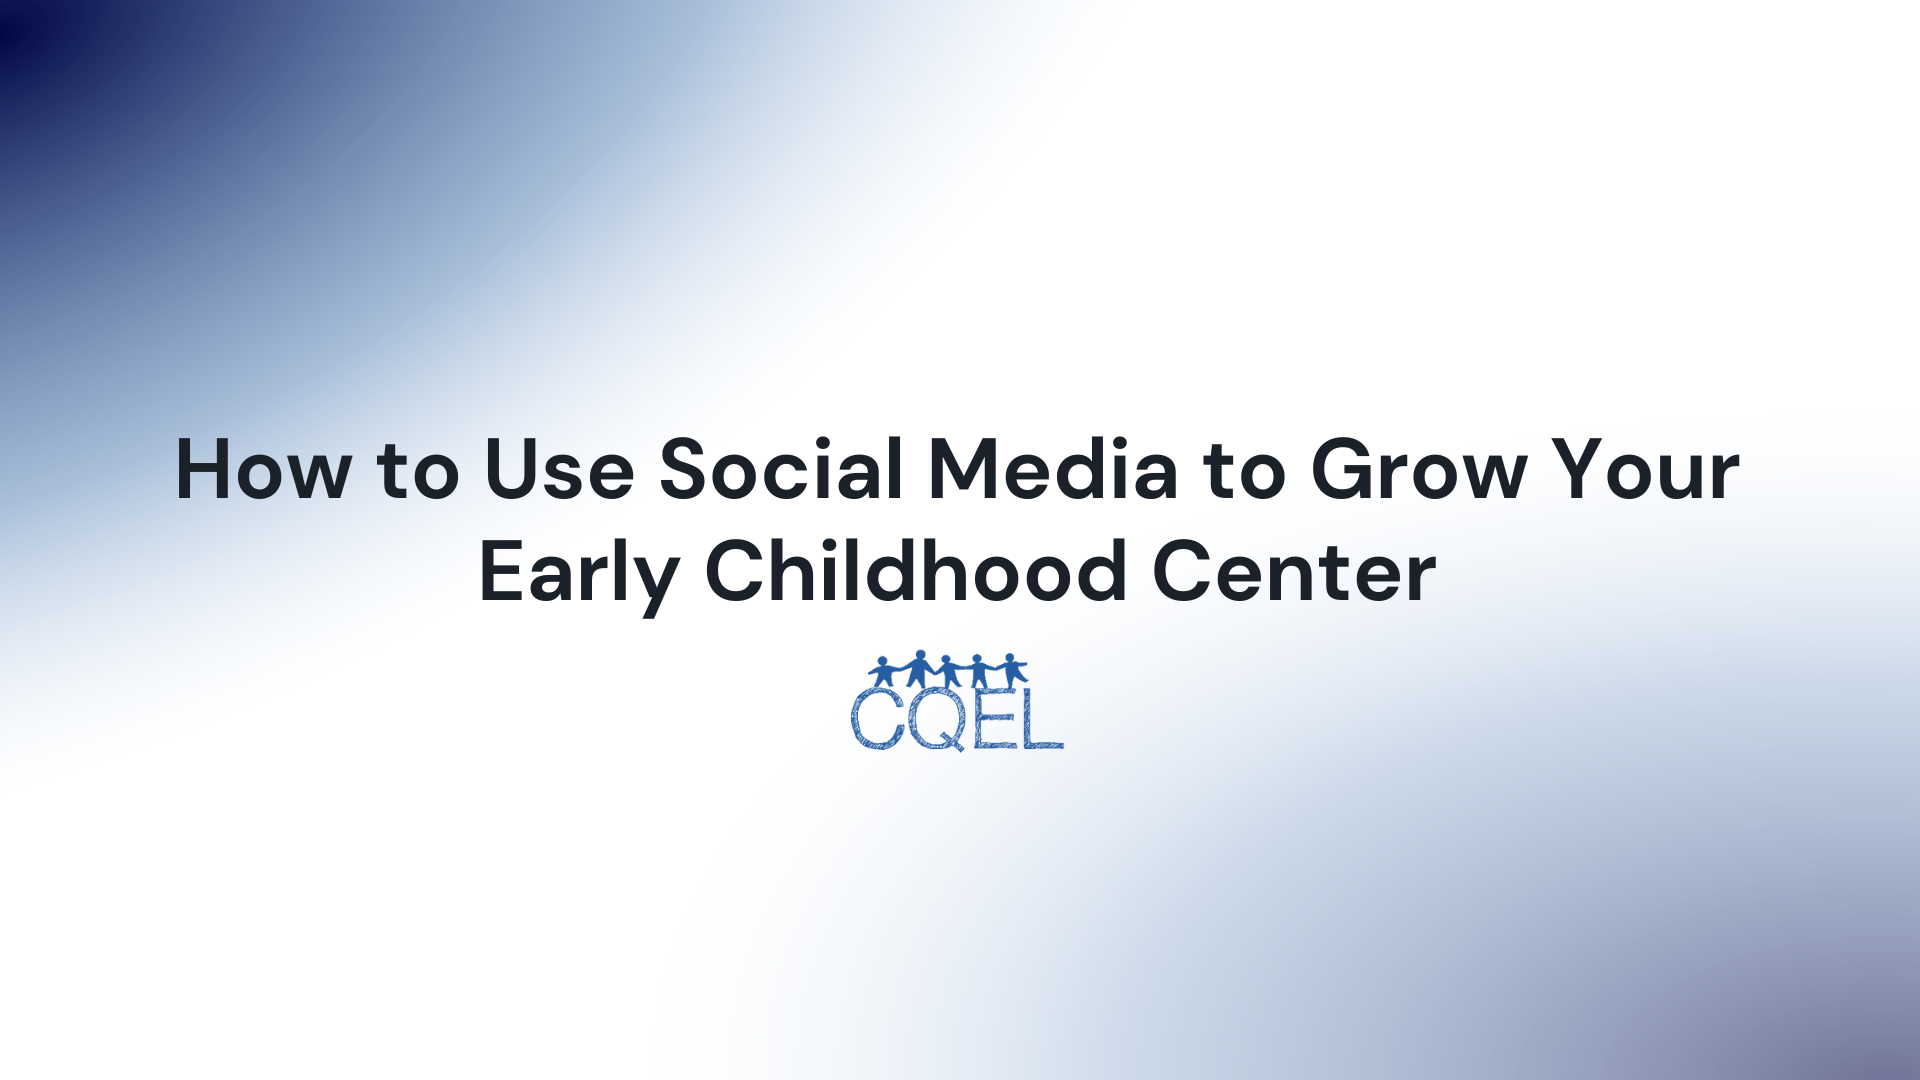 How to Use Social Media to Grow Your Early Childhood Center